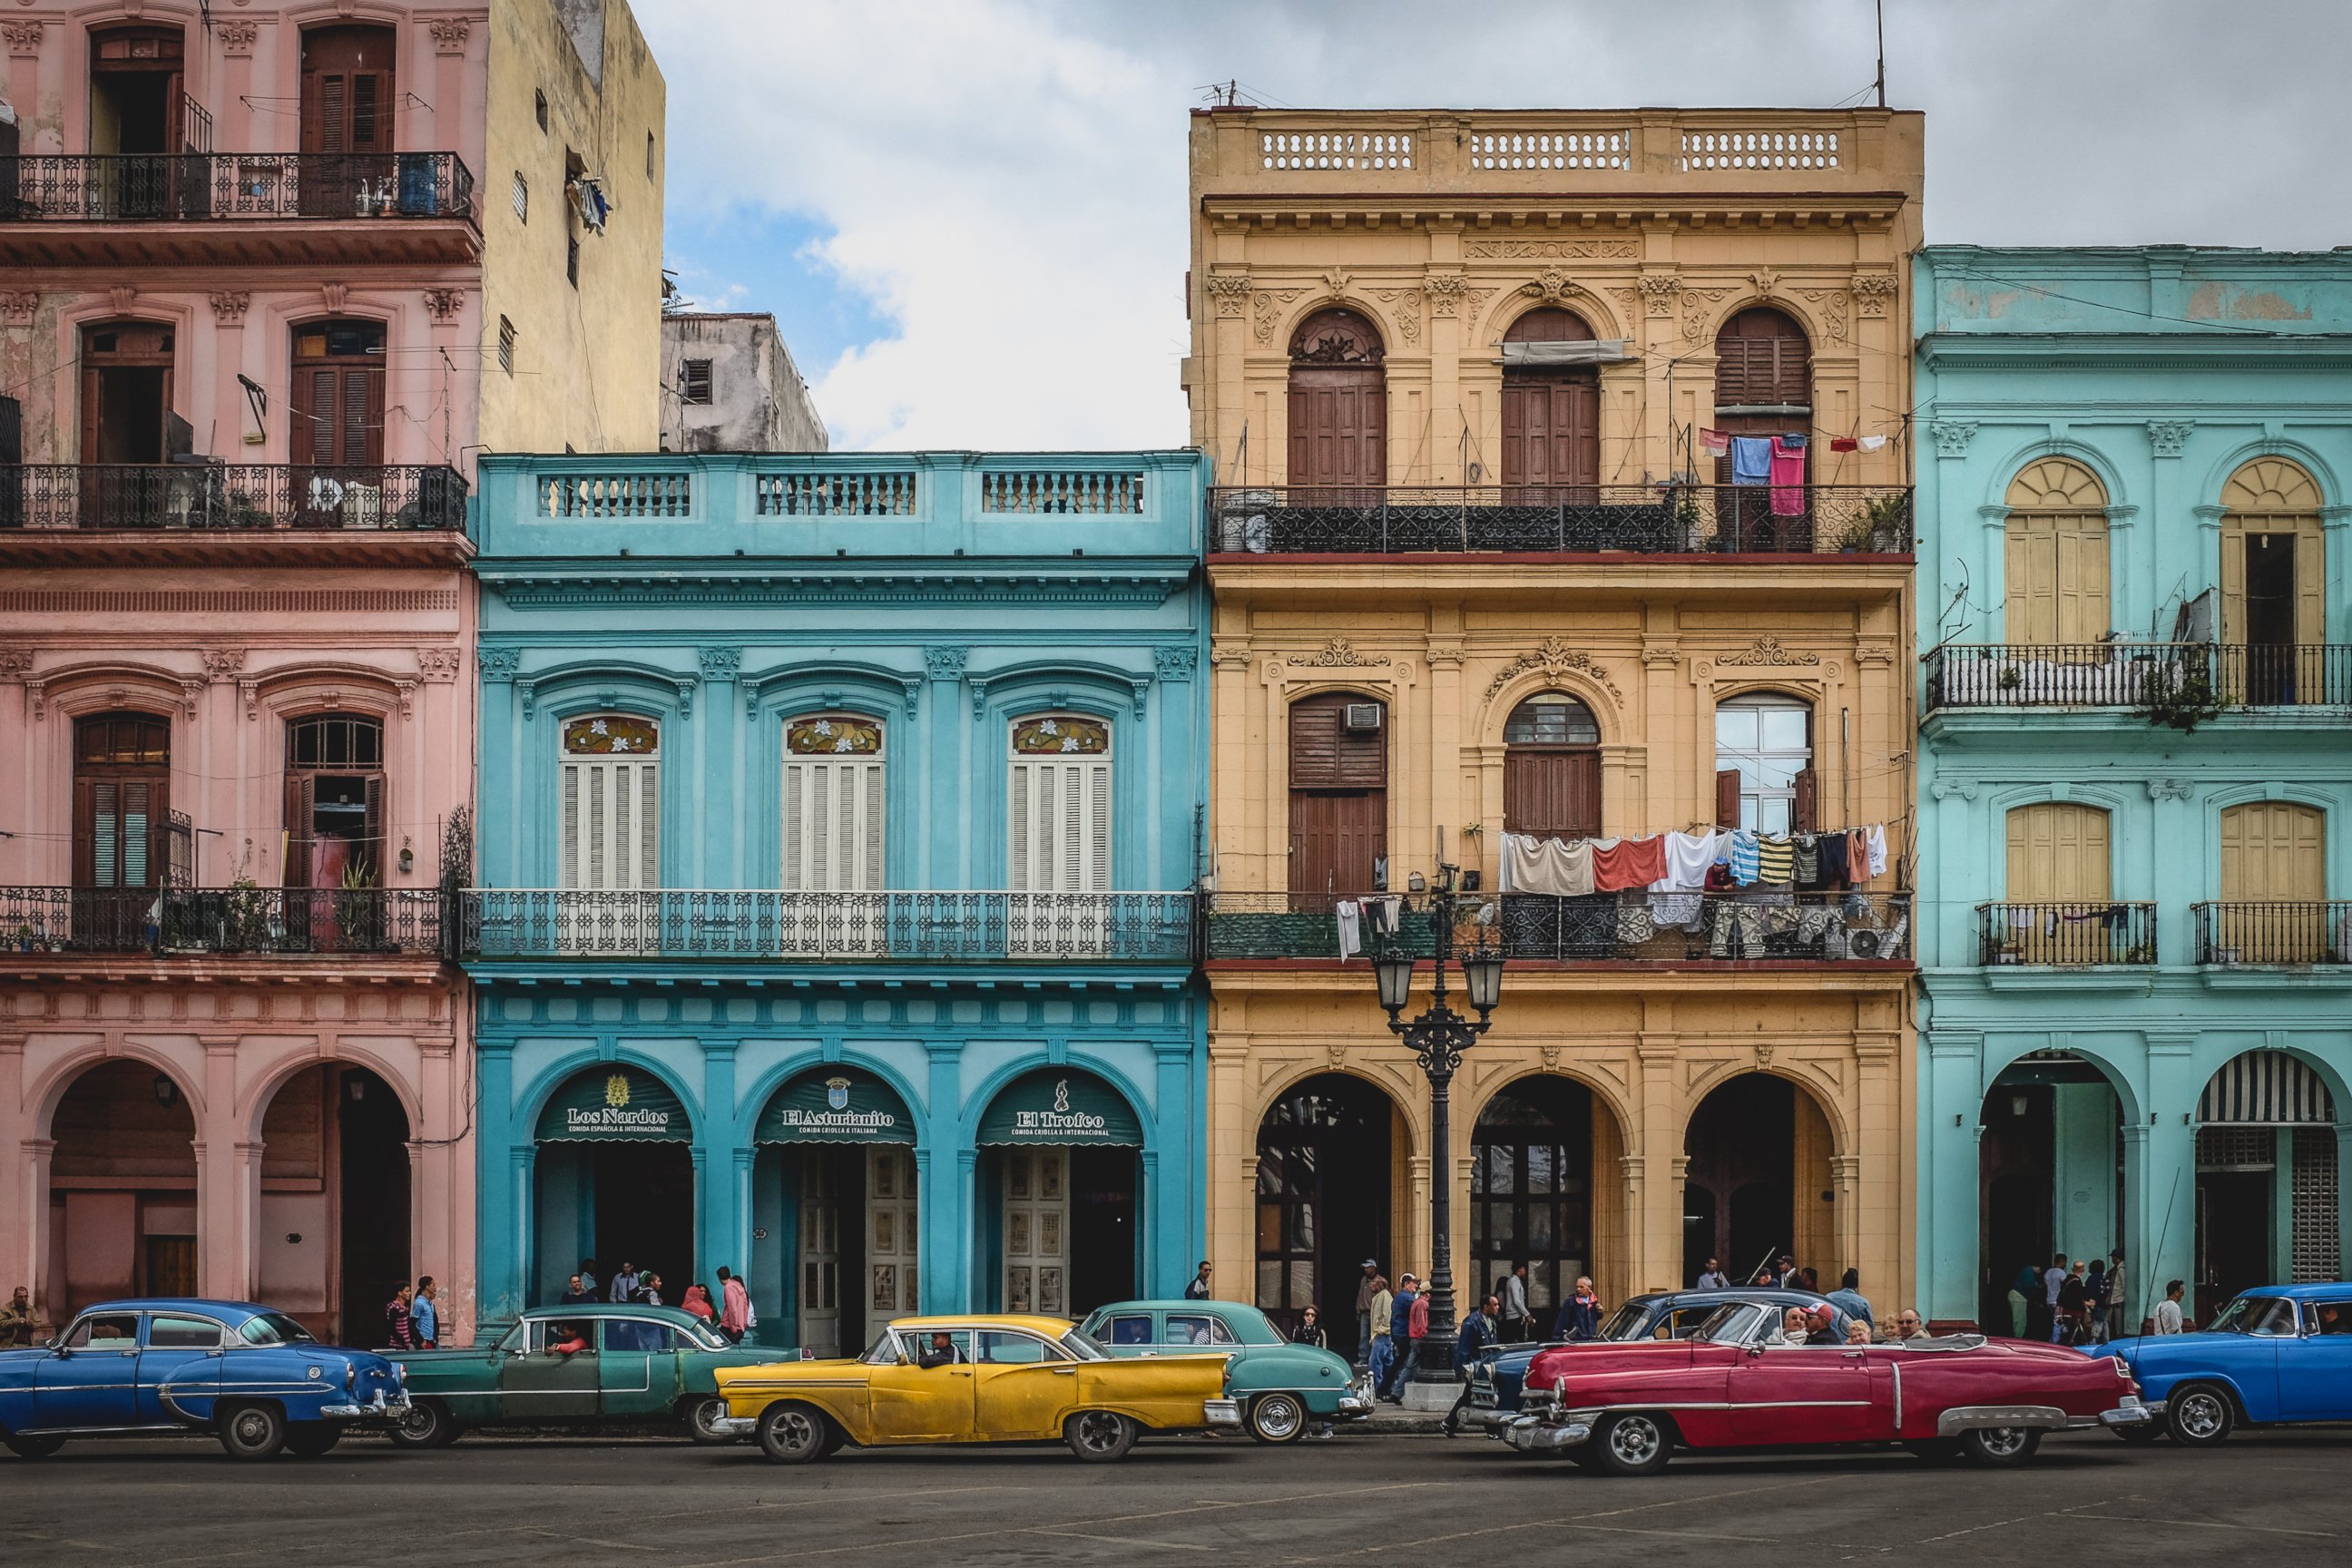 PHOTO: Colonial buildings appear in this undated photo of old Havana, with many colorful old american cars driving along the road.